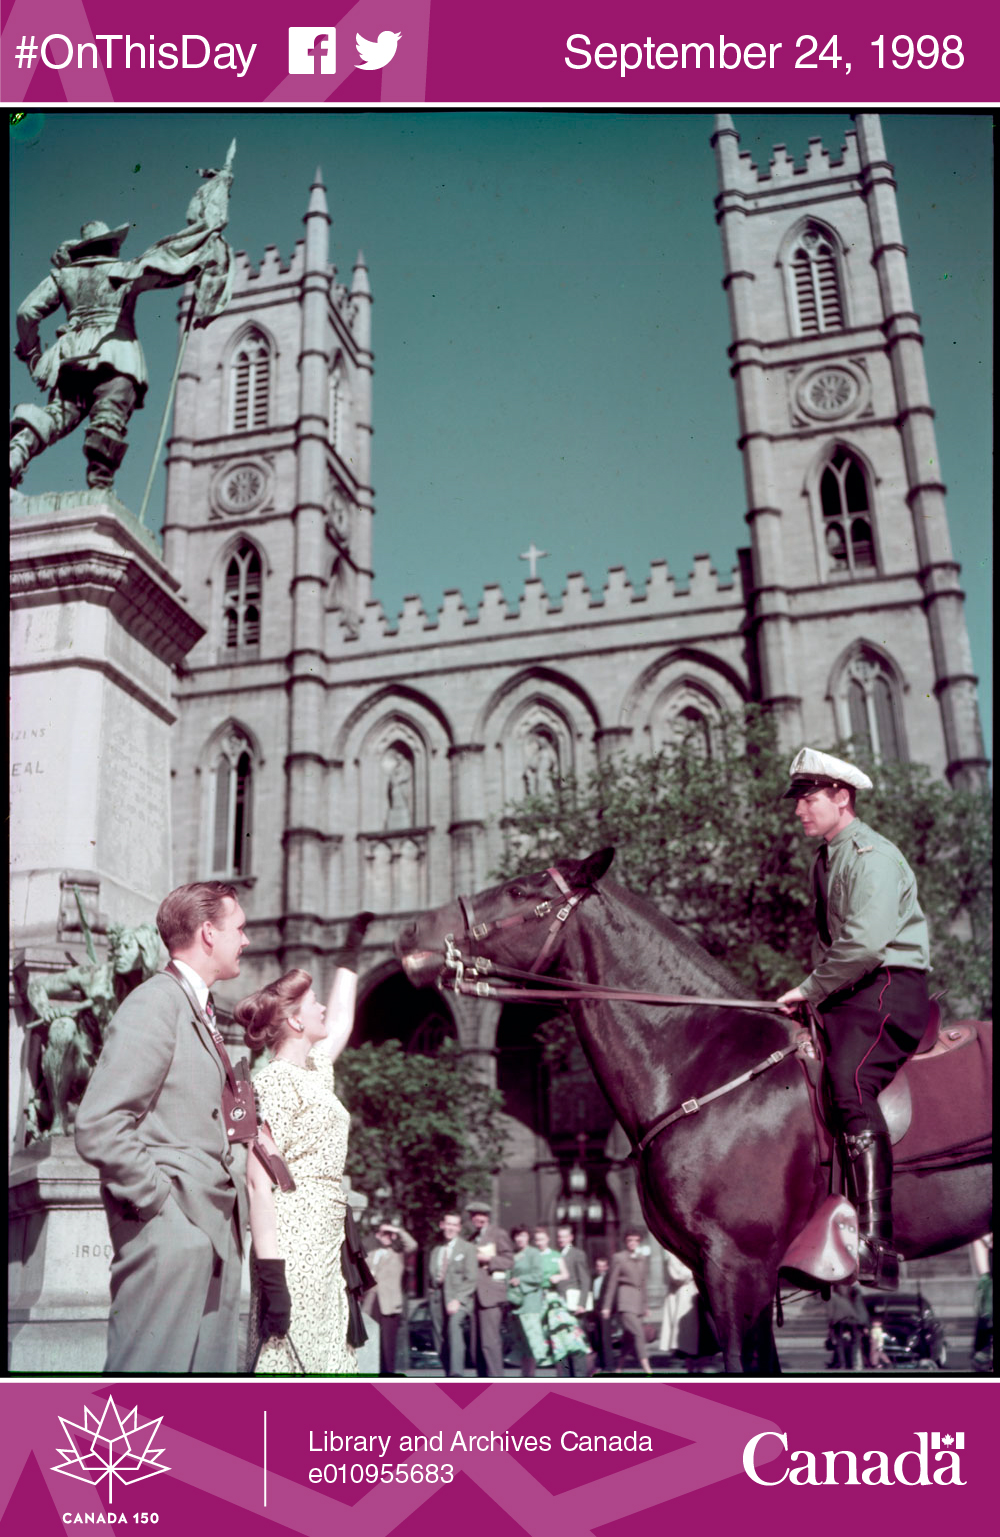 Photo of police officer on horseback with tourists at Place d'Armes in Montréal, with the Maisonneuve monument and Notre-Dame Basilica in the background, June 1950